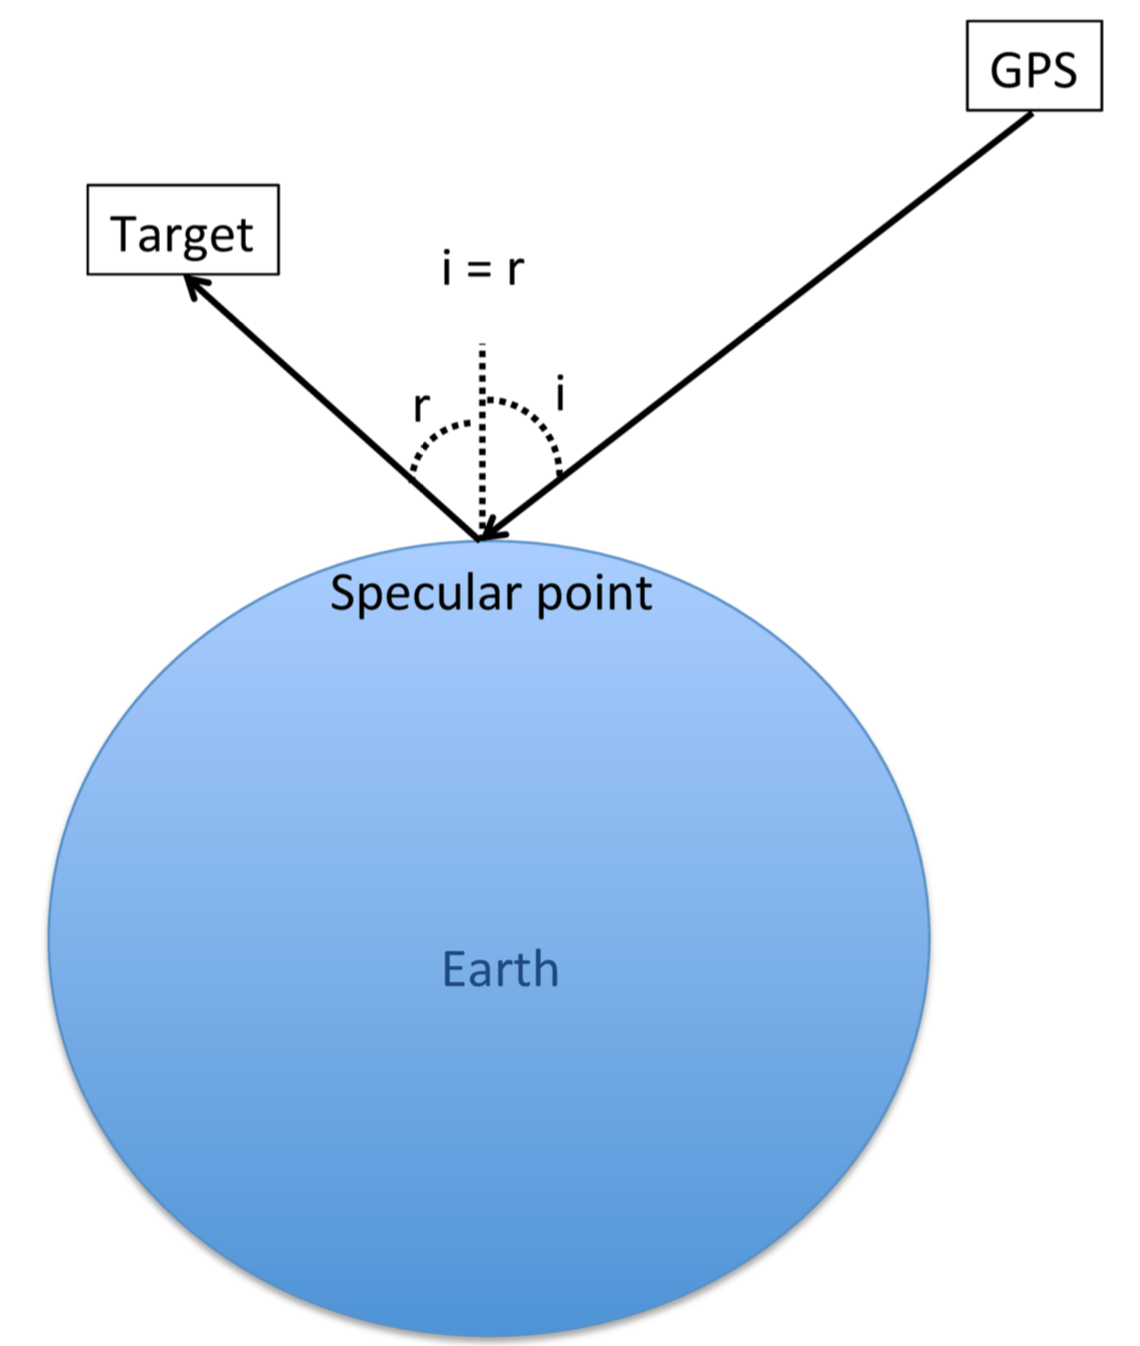 Geometry of a specular point